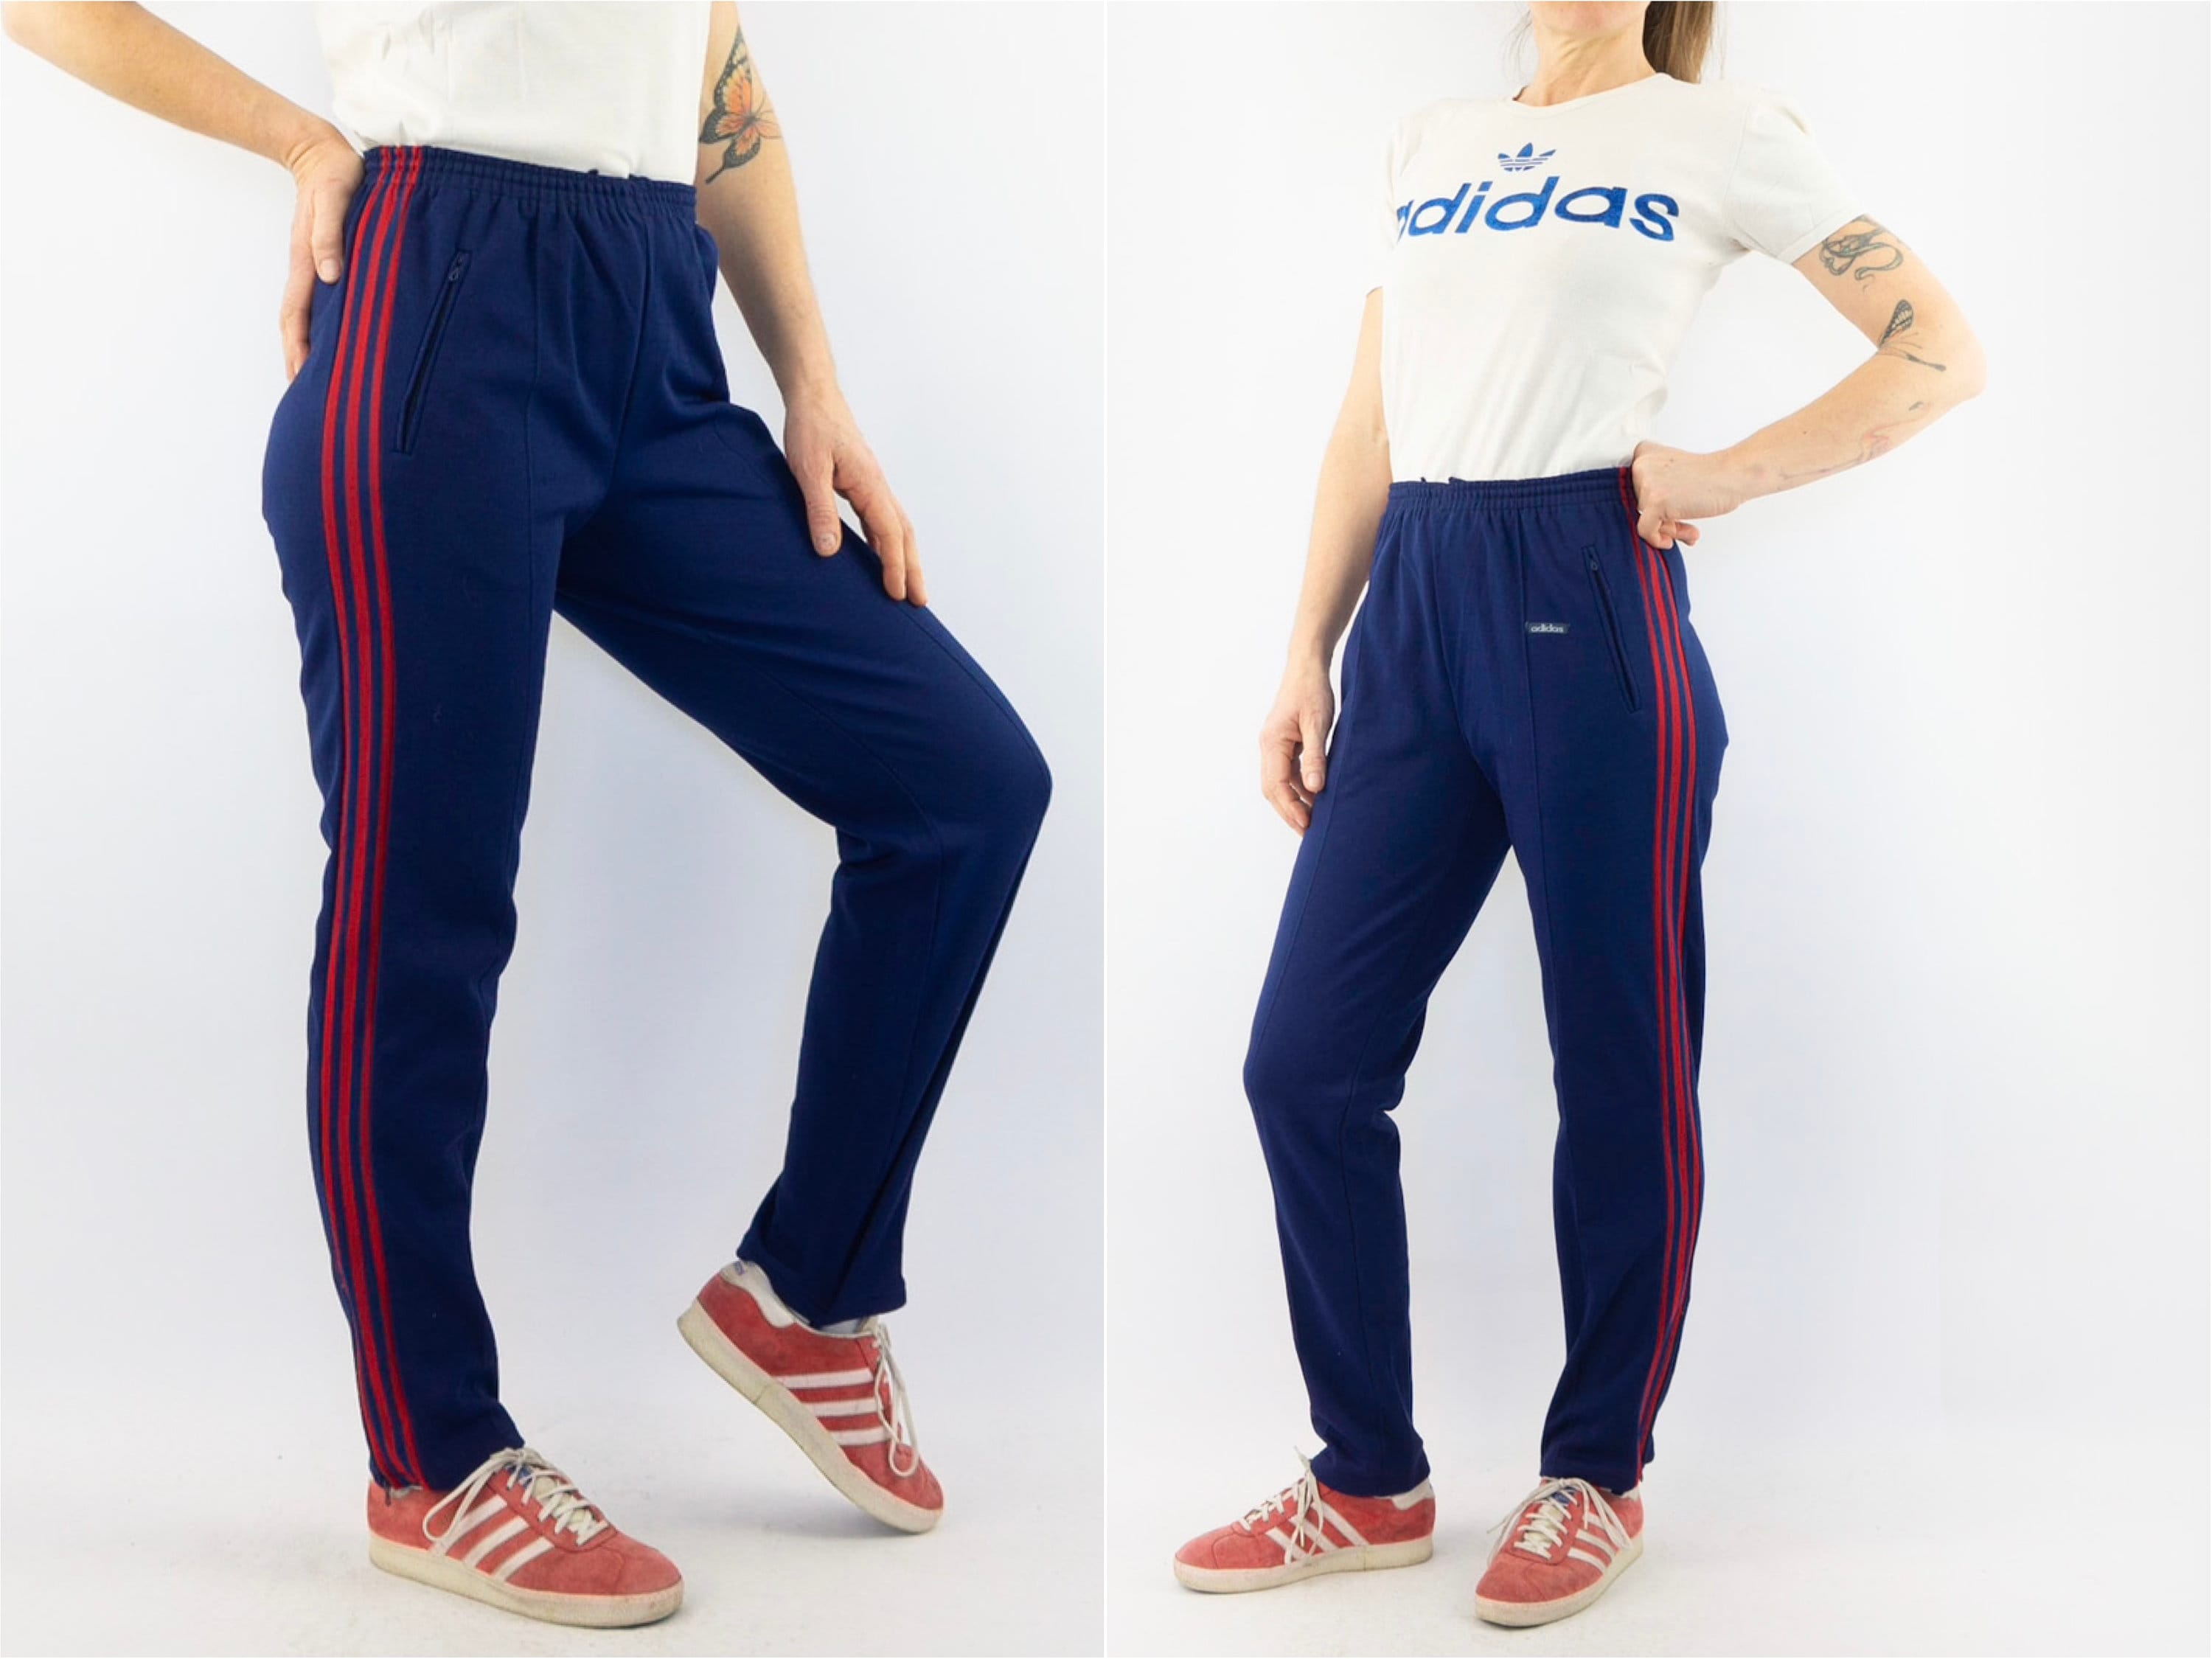 adidas Adicolor Red Tearaway Track Pants  Track pants outfit Red adidas  pants Striped side pants